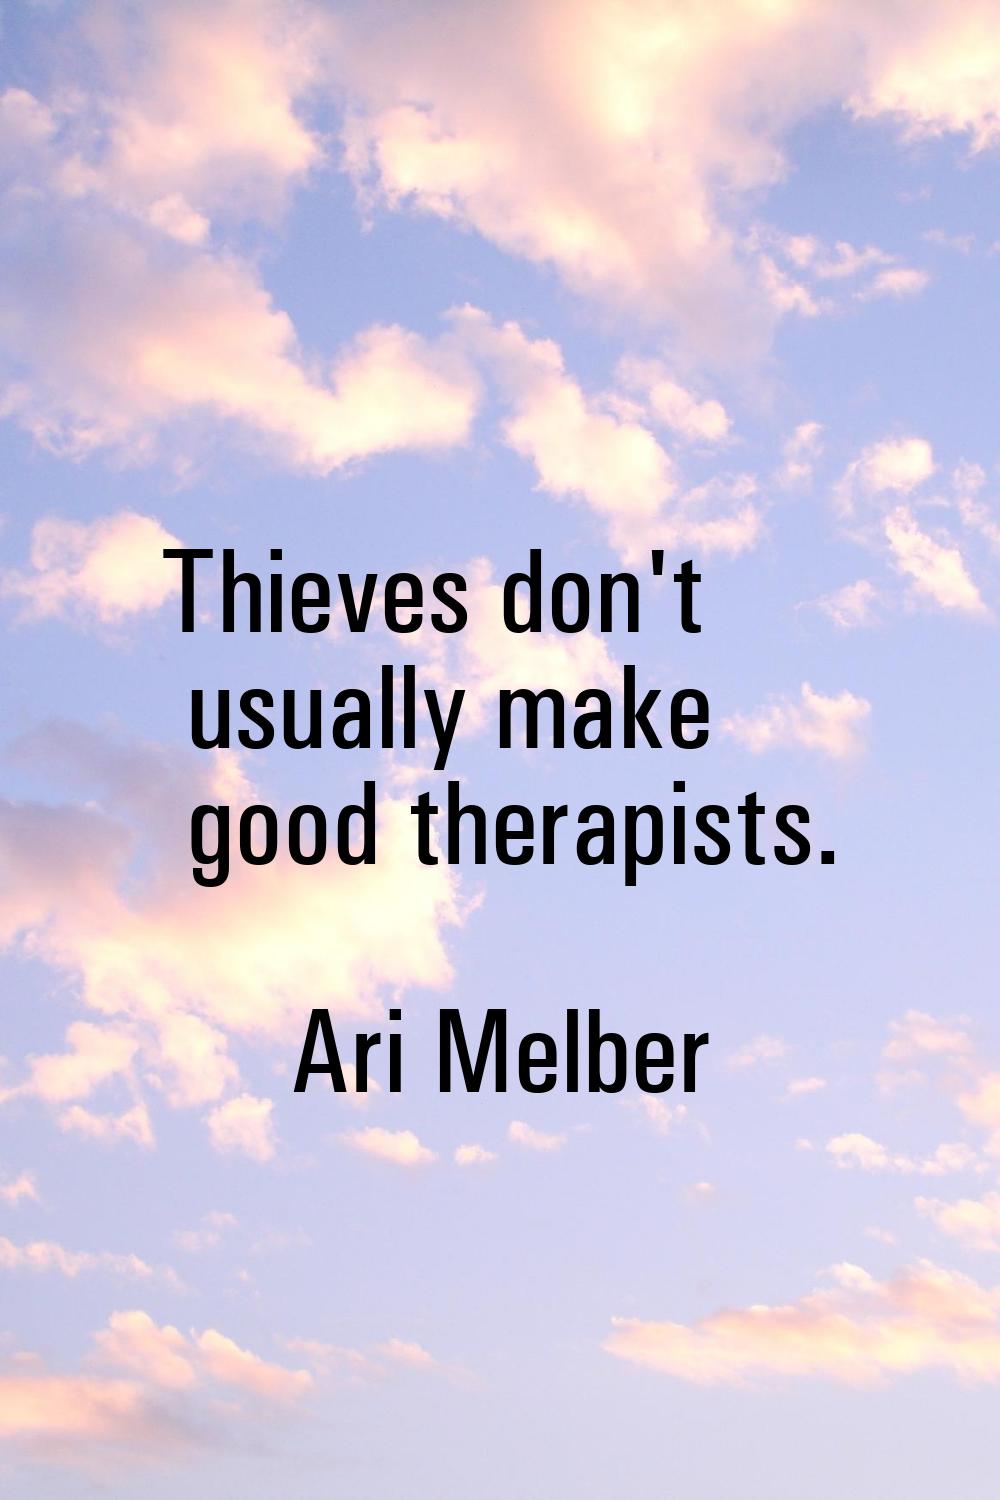 Thieves don't usually make good therapists.